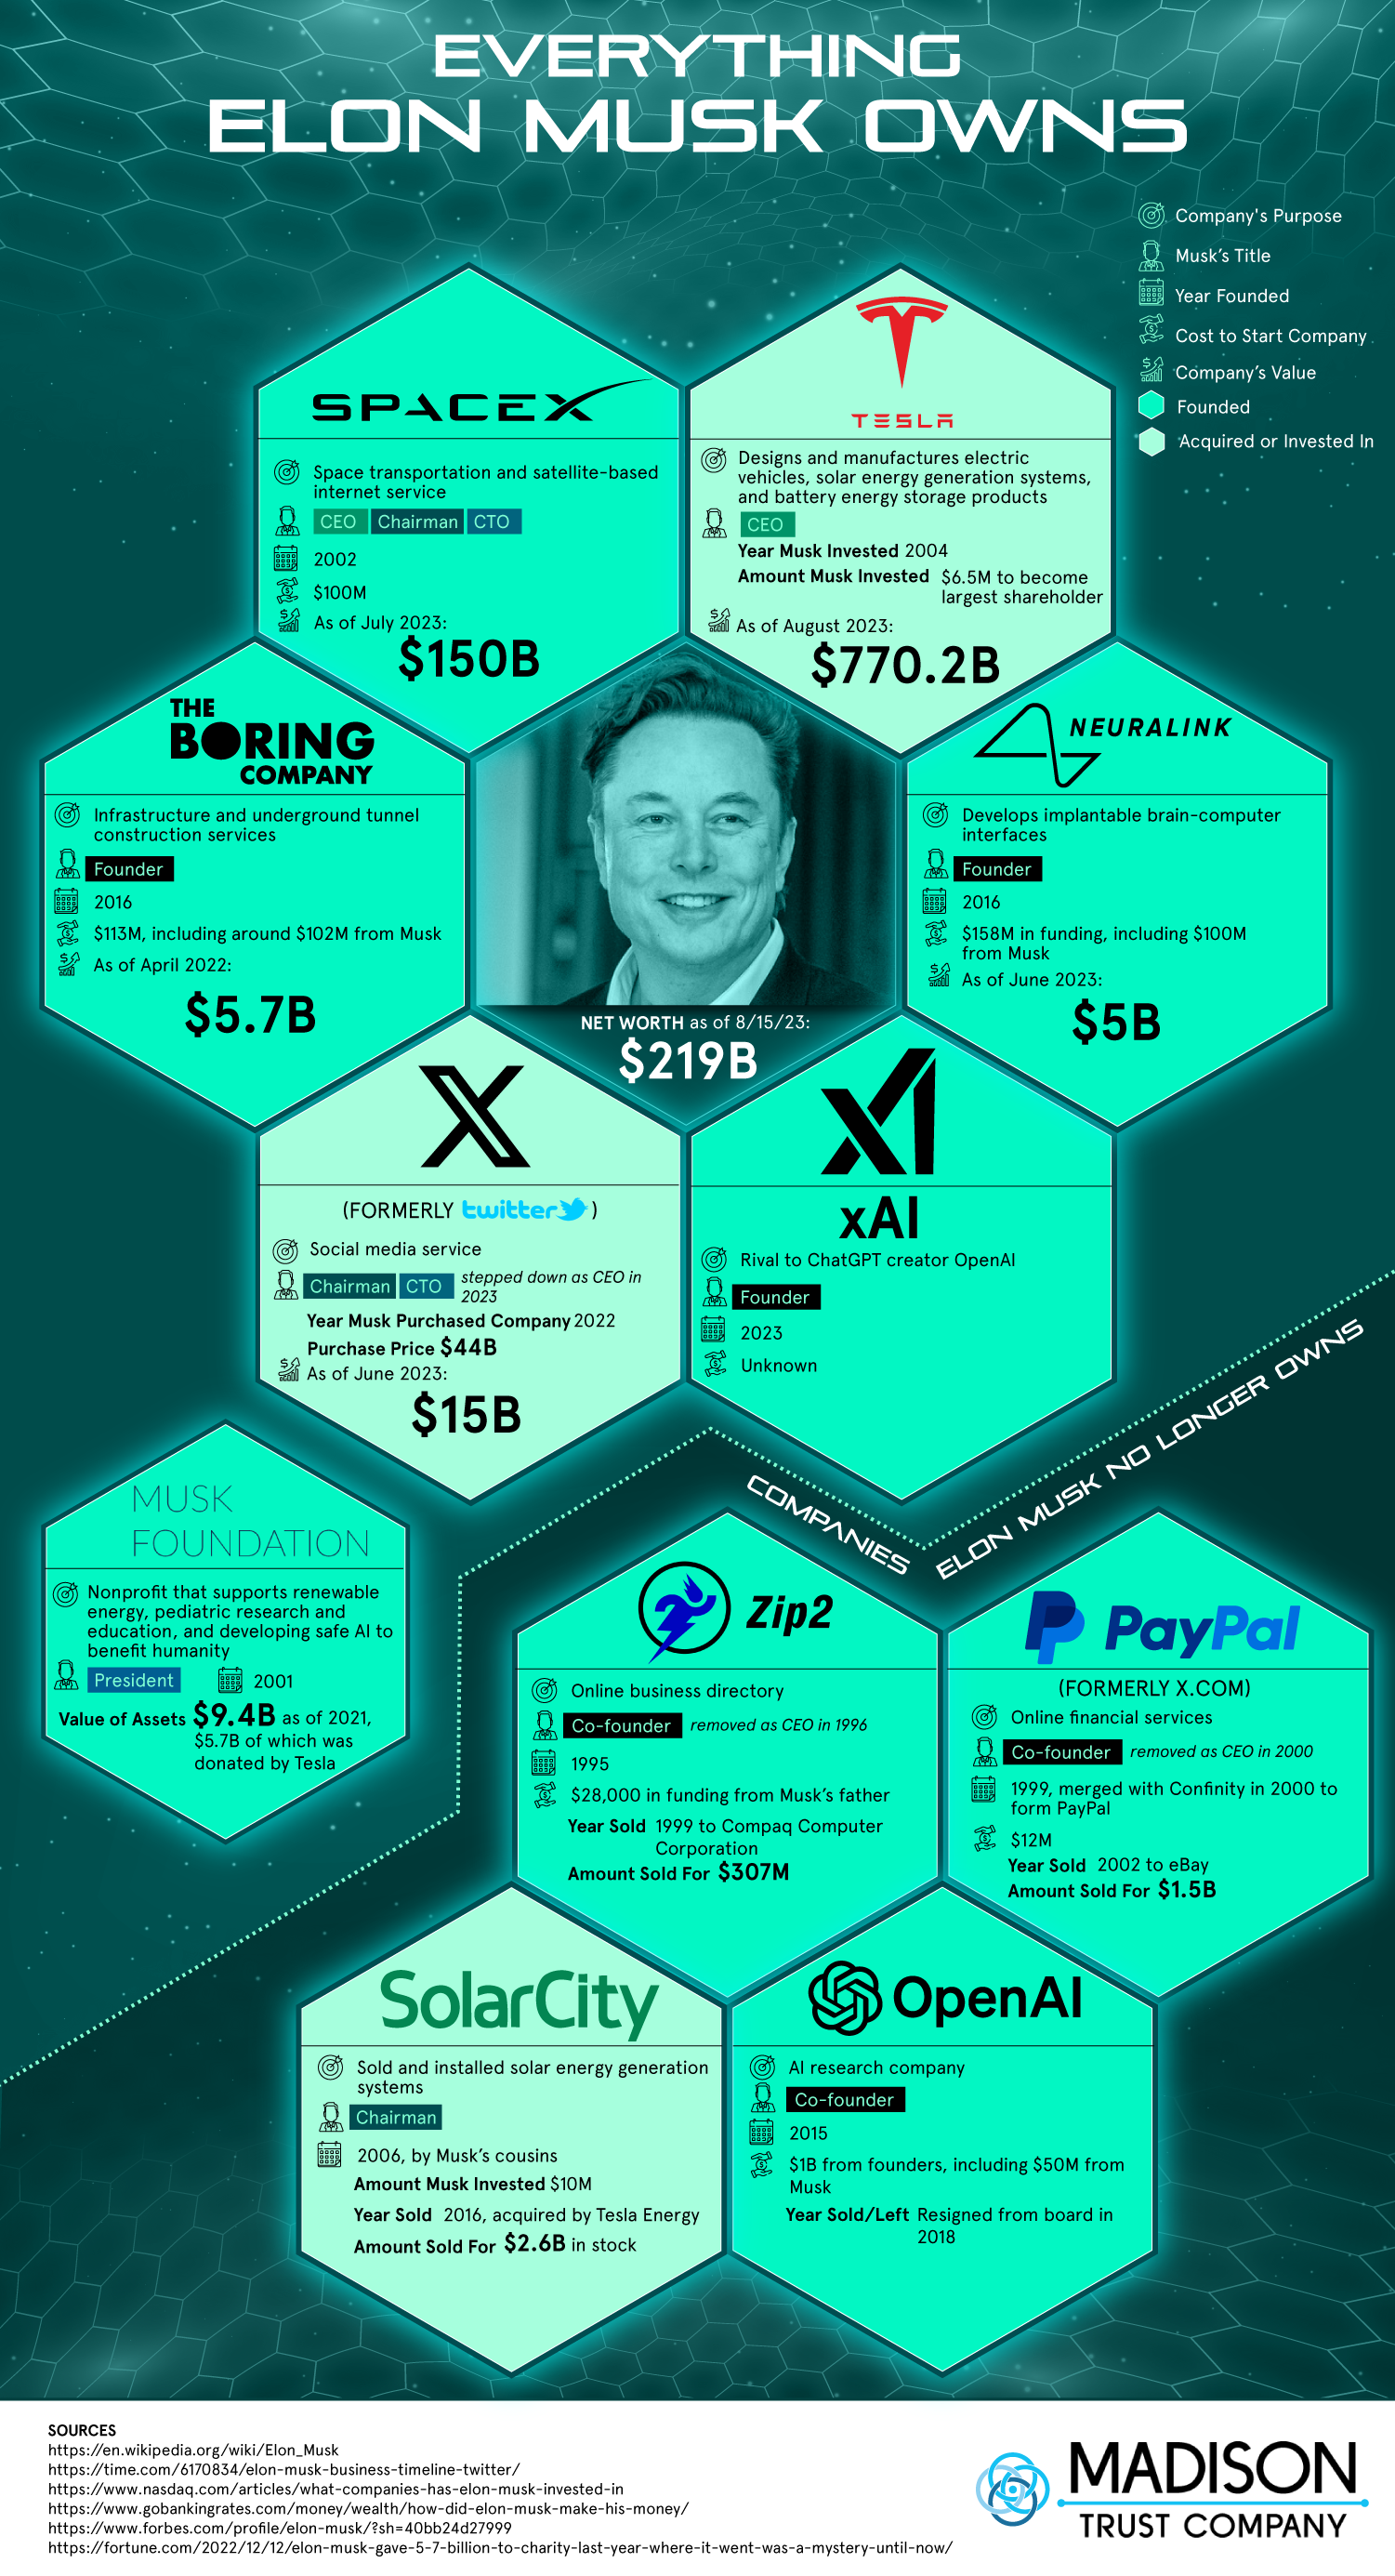 How much of SpaceX does Elon Musk own?